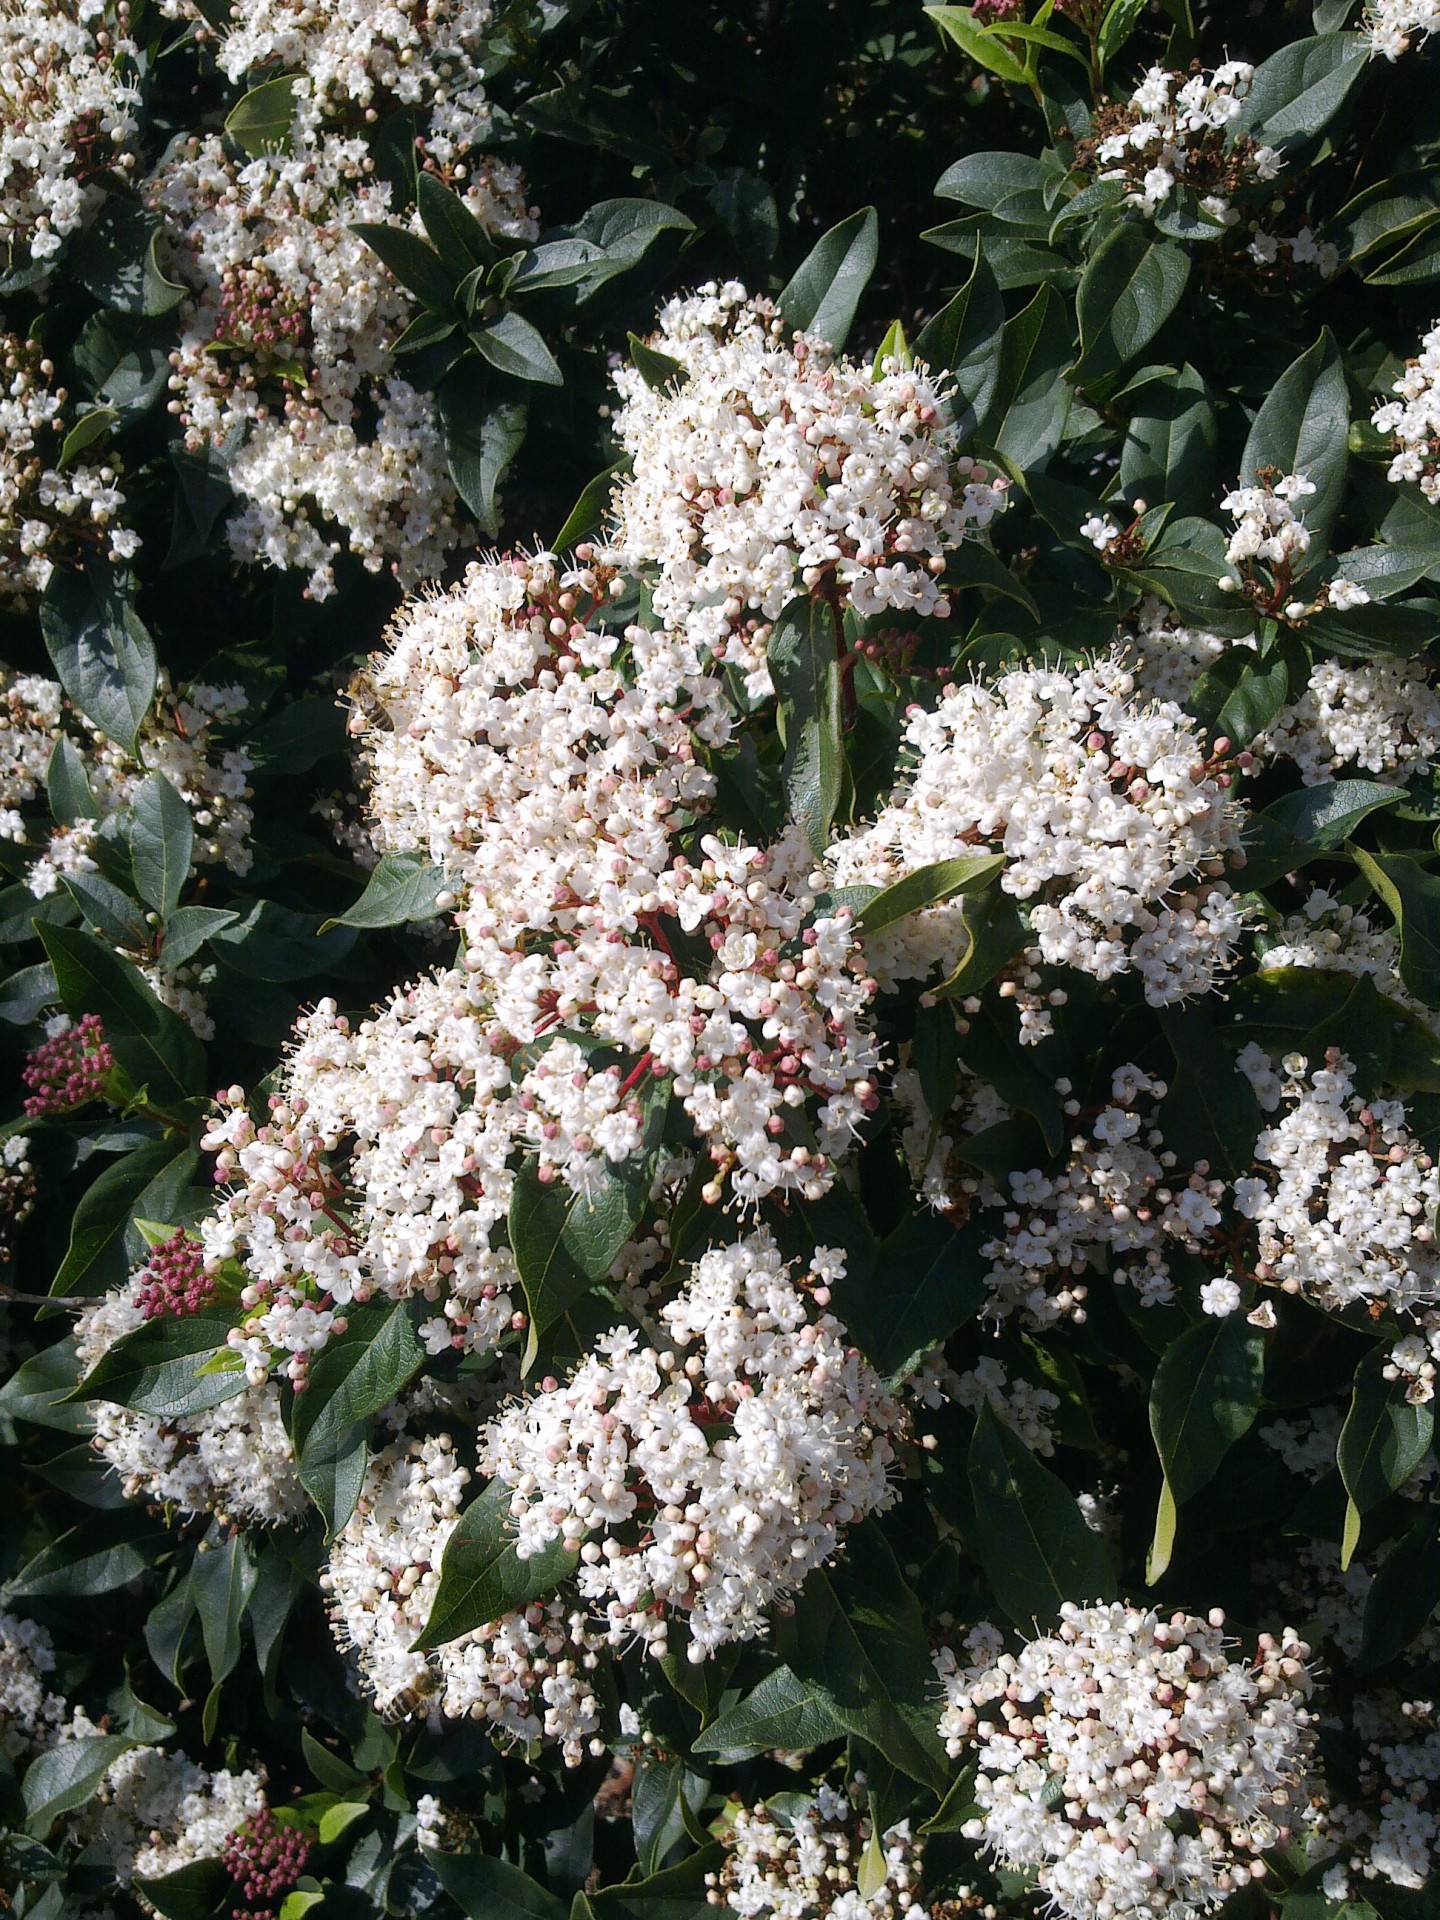 This lovely shrub flowers once a year with sweet scented flowers